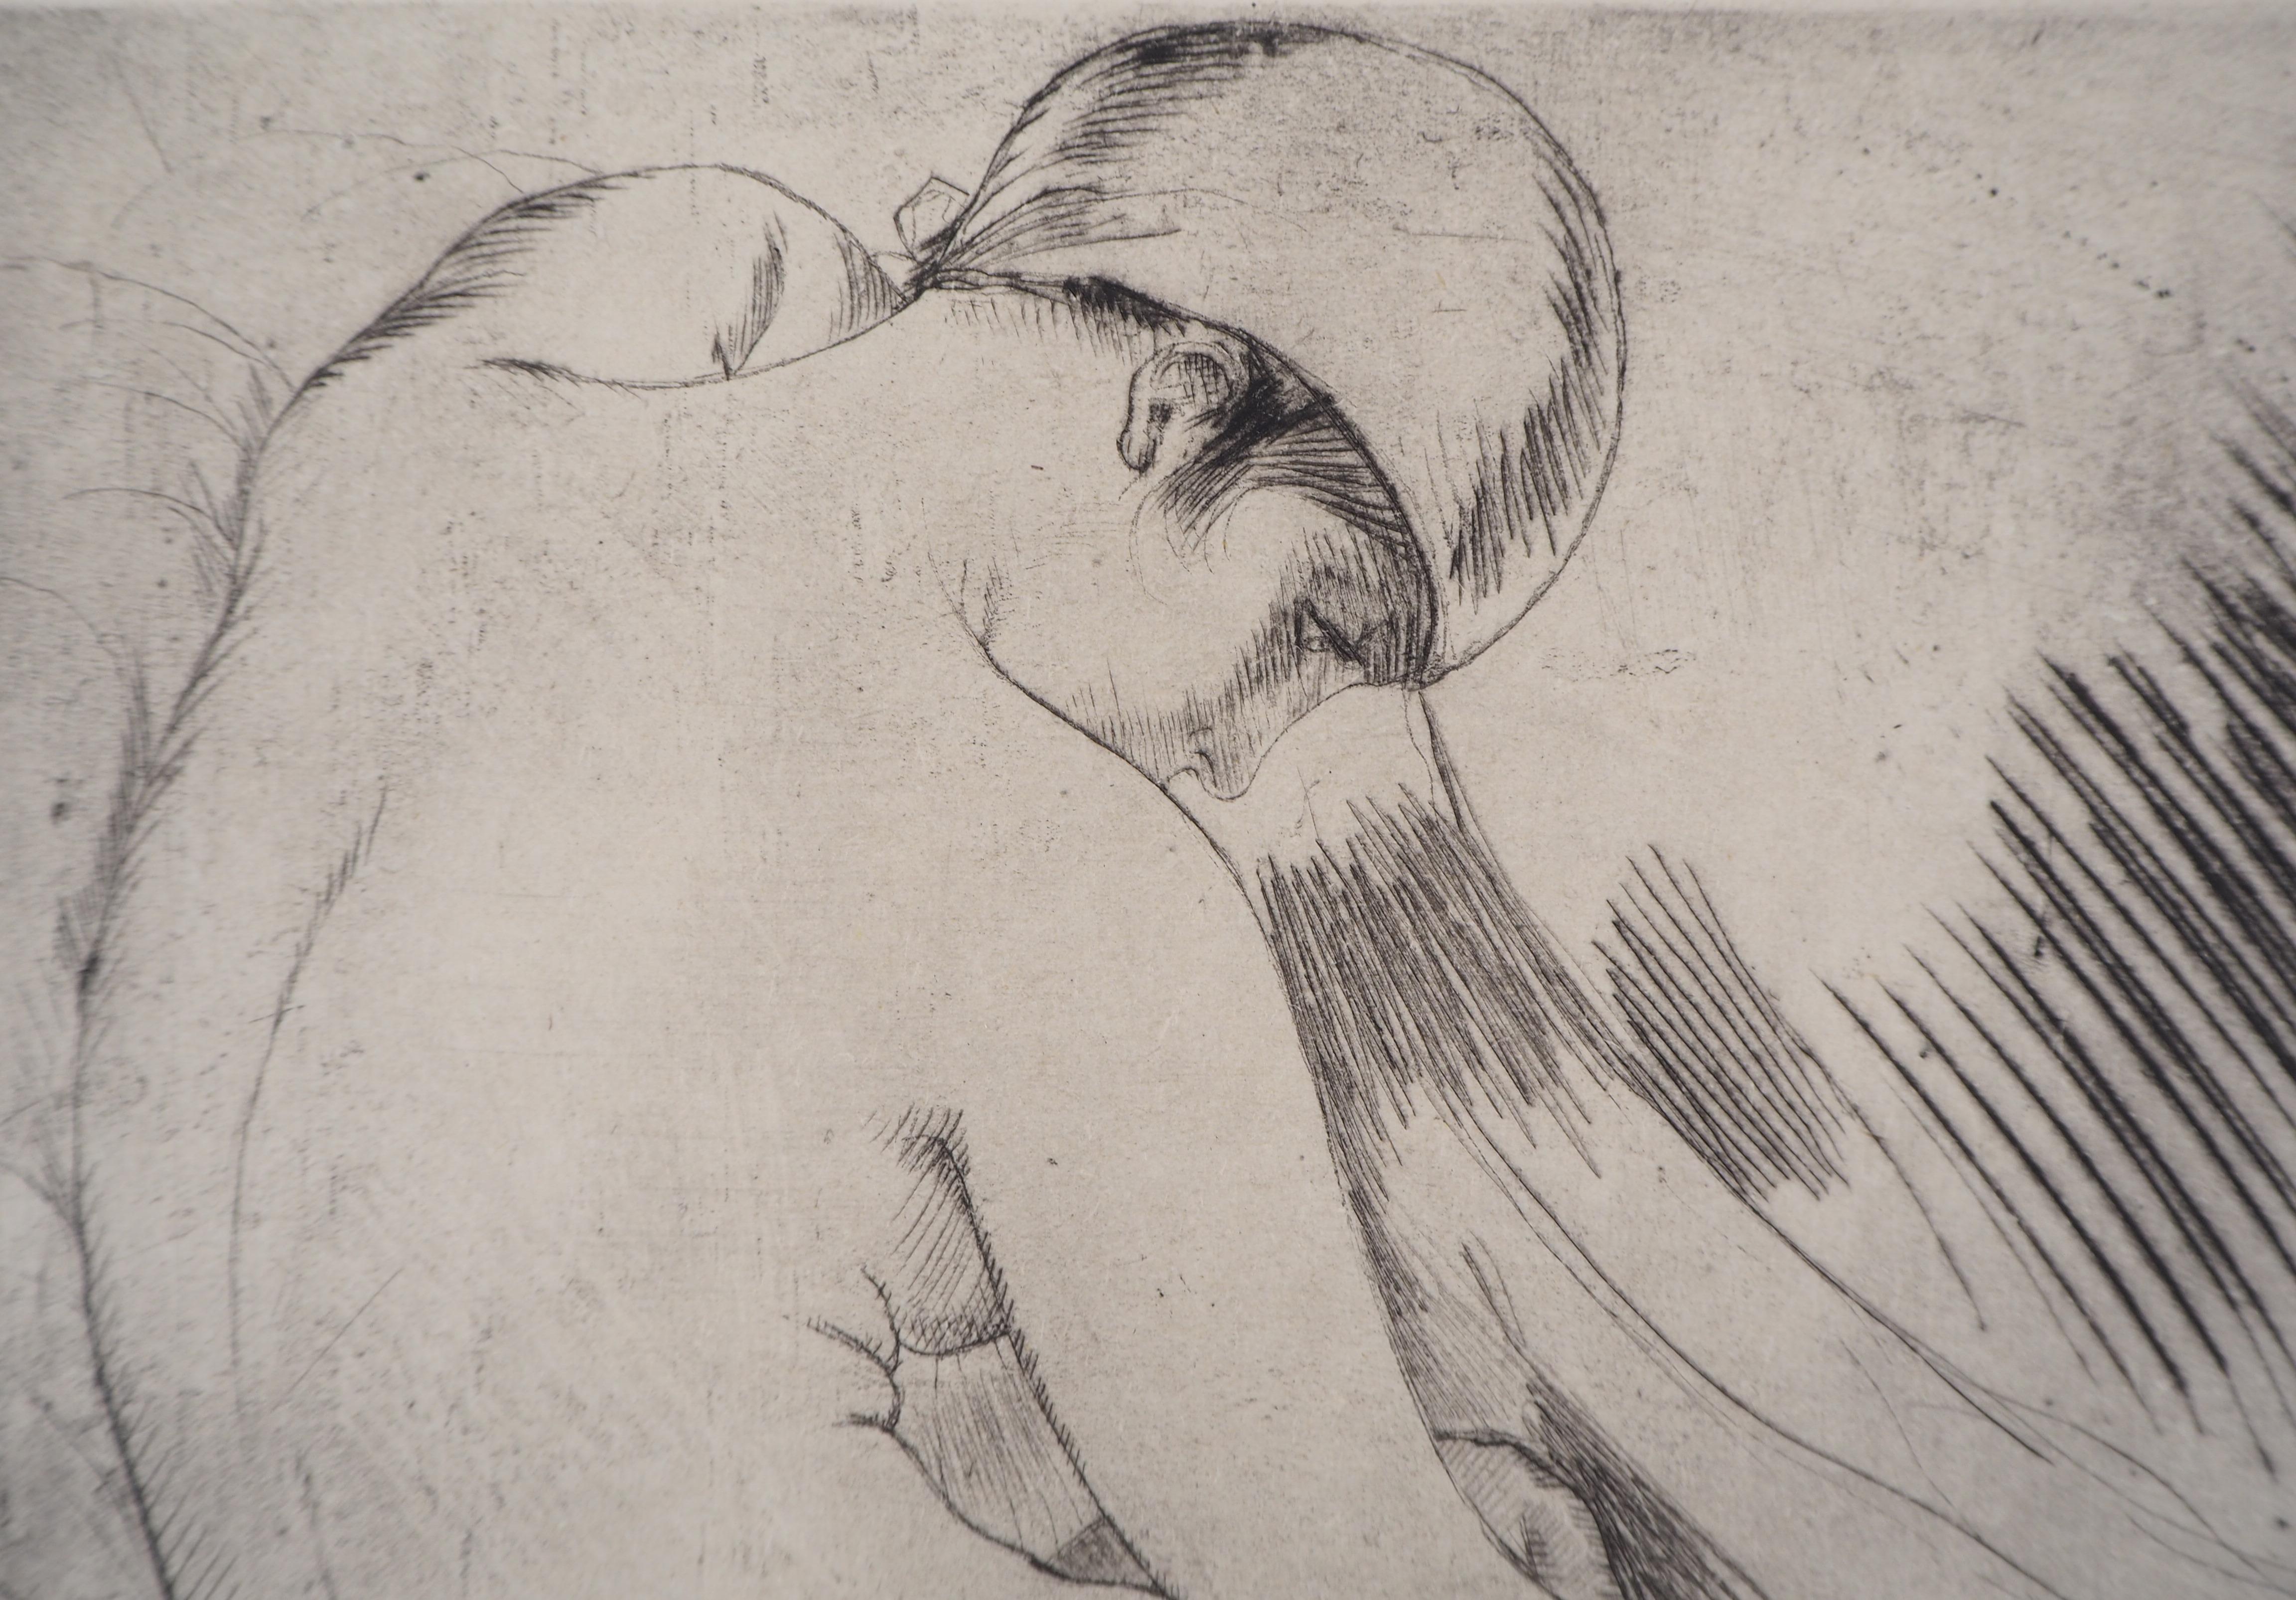 Nude with a Scarf - Original drypoint etching, Handsigned, 1928 - Modern Print by Armand Rassenfosse